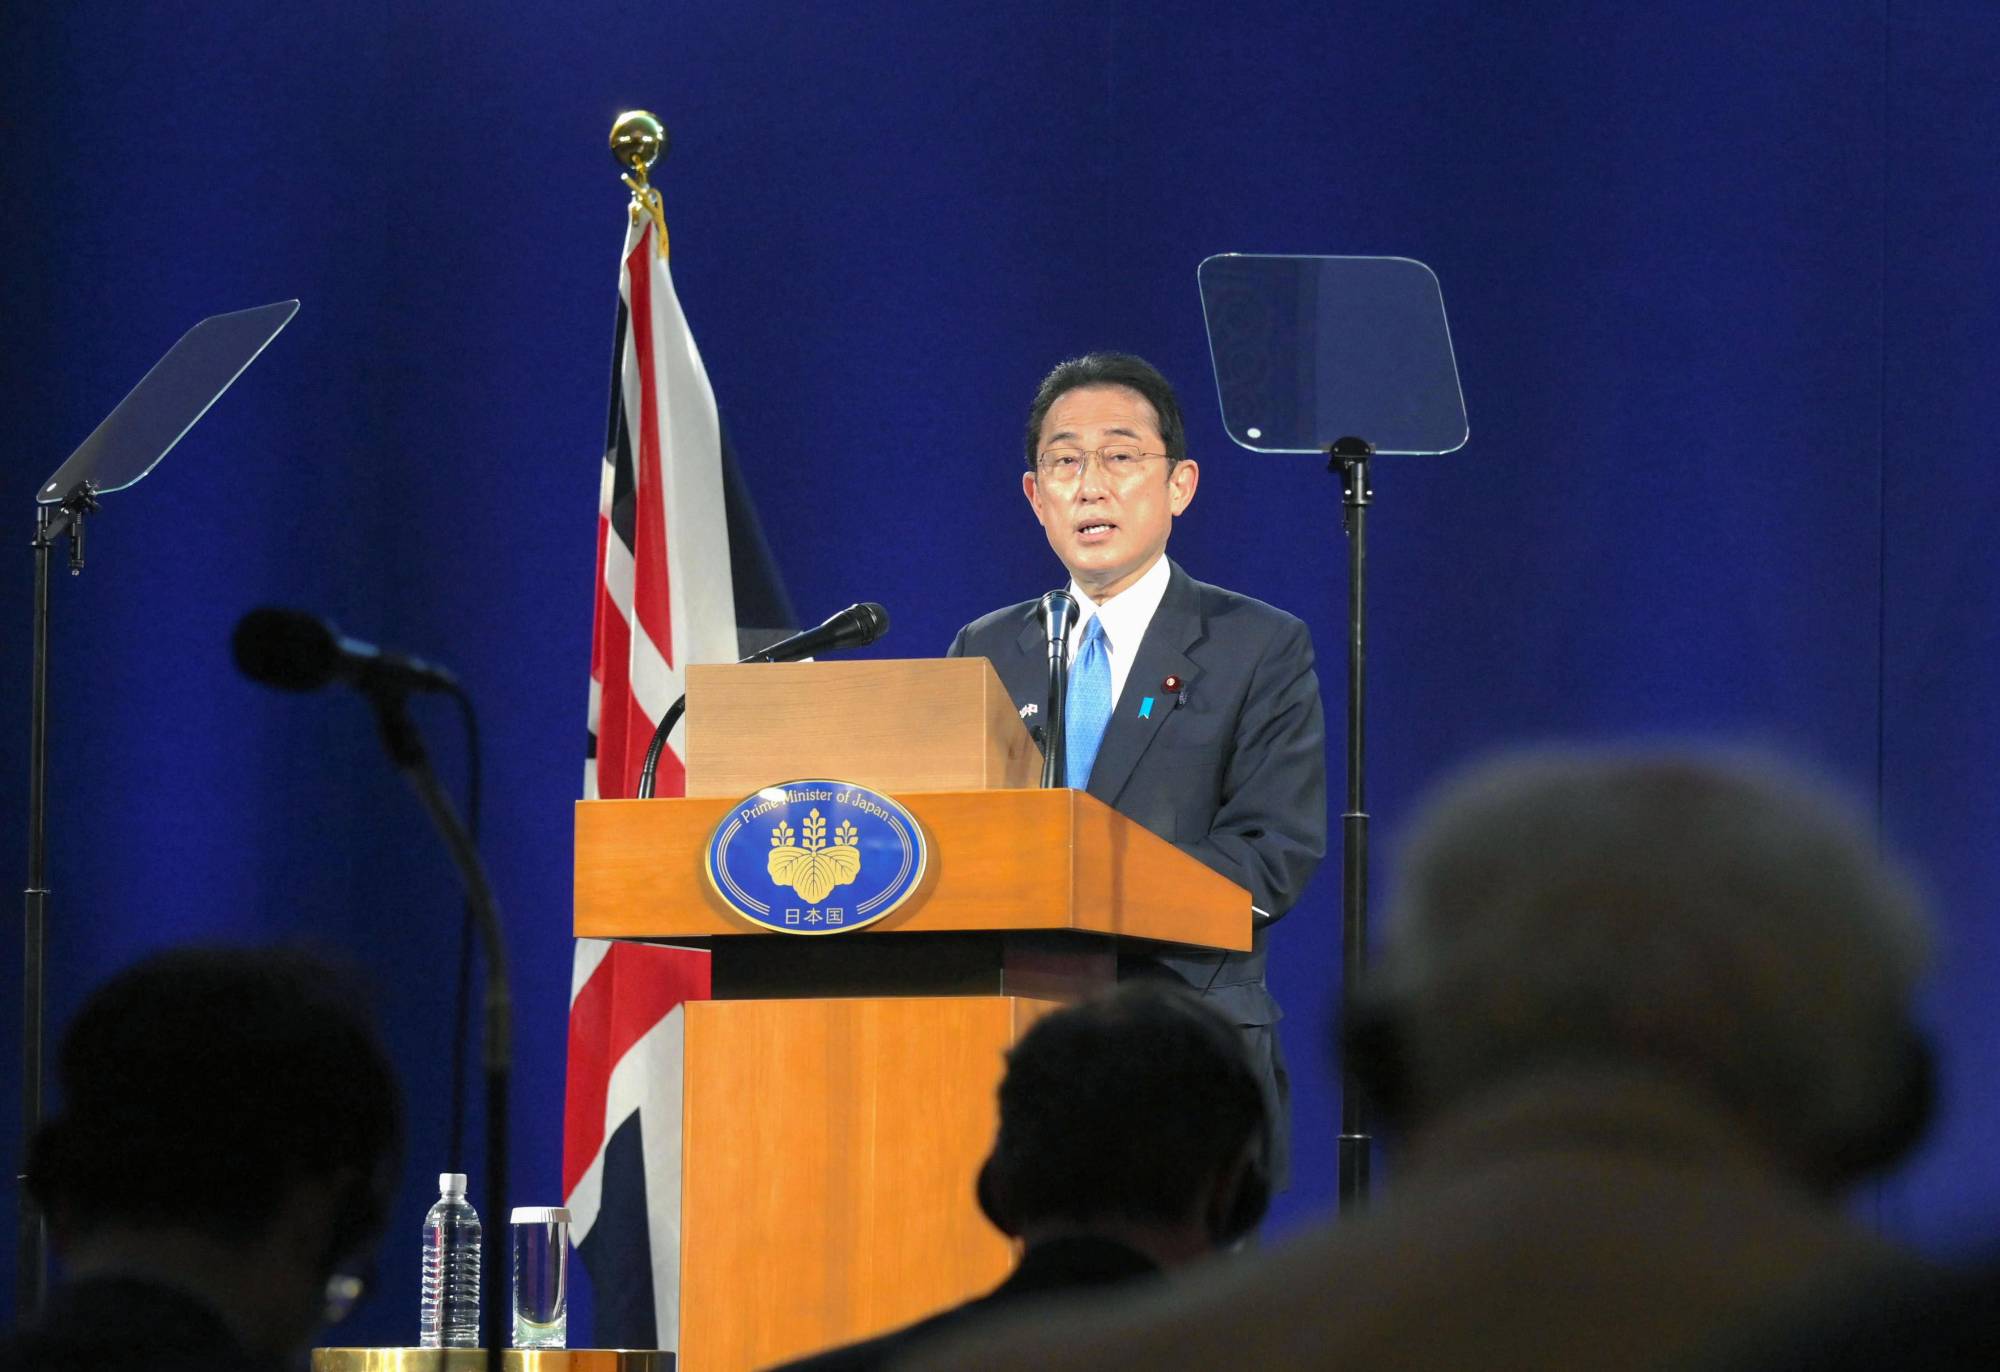 Prime Minister Fumio Kishida speaks during a news conference in London on Thursday. | POOL / VIA KYODO